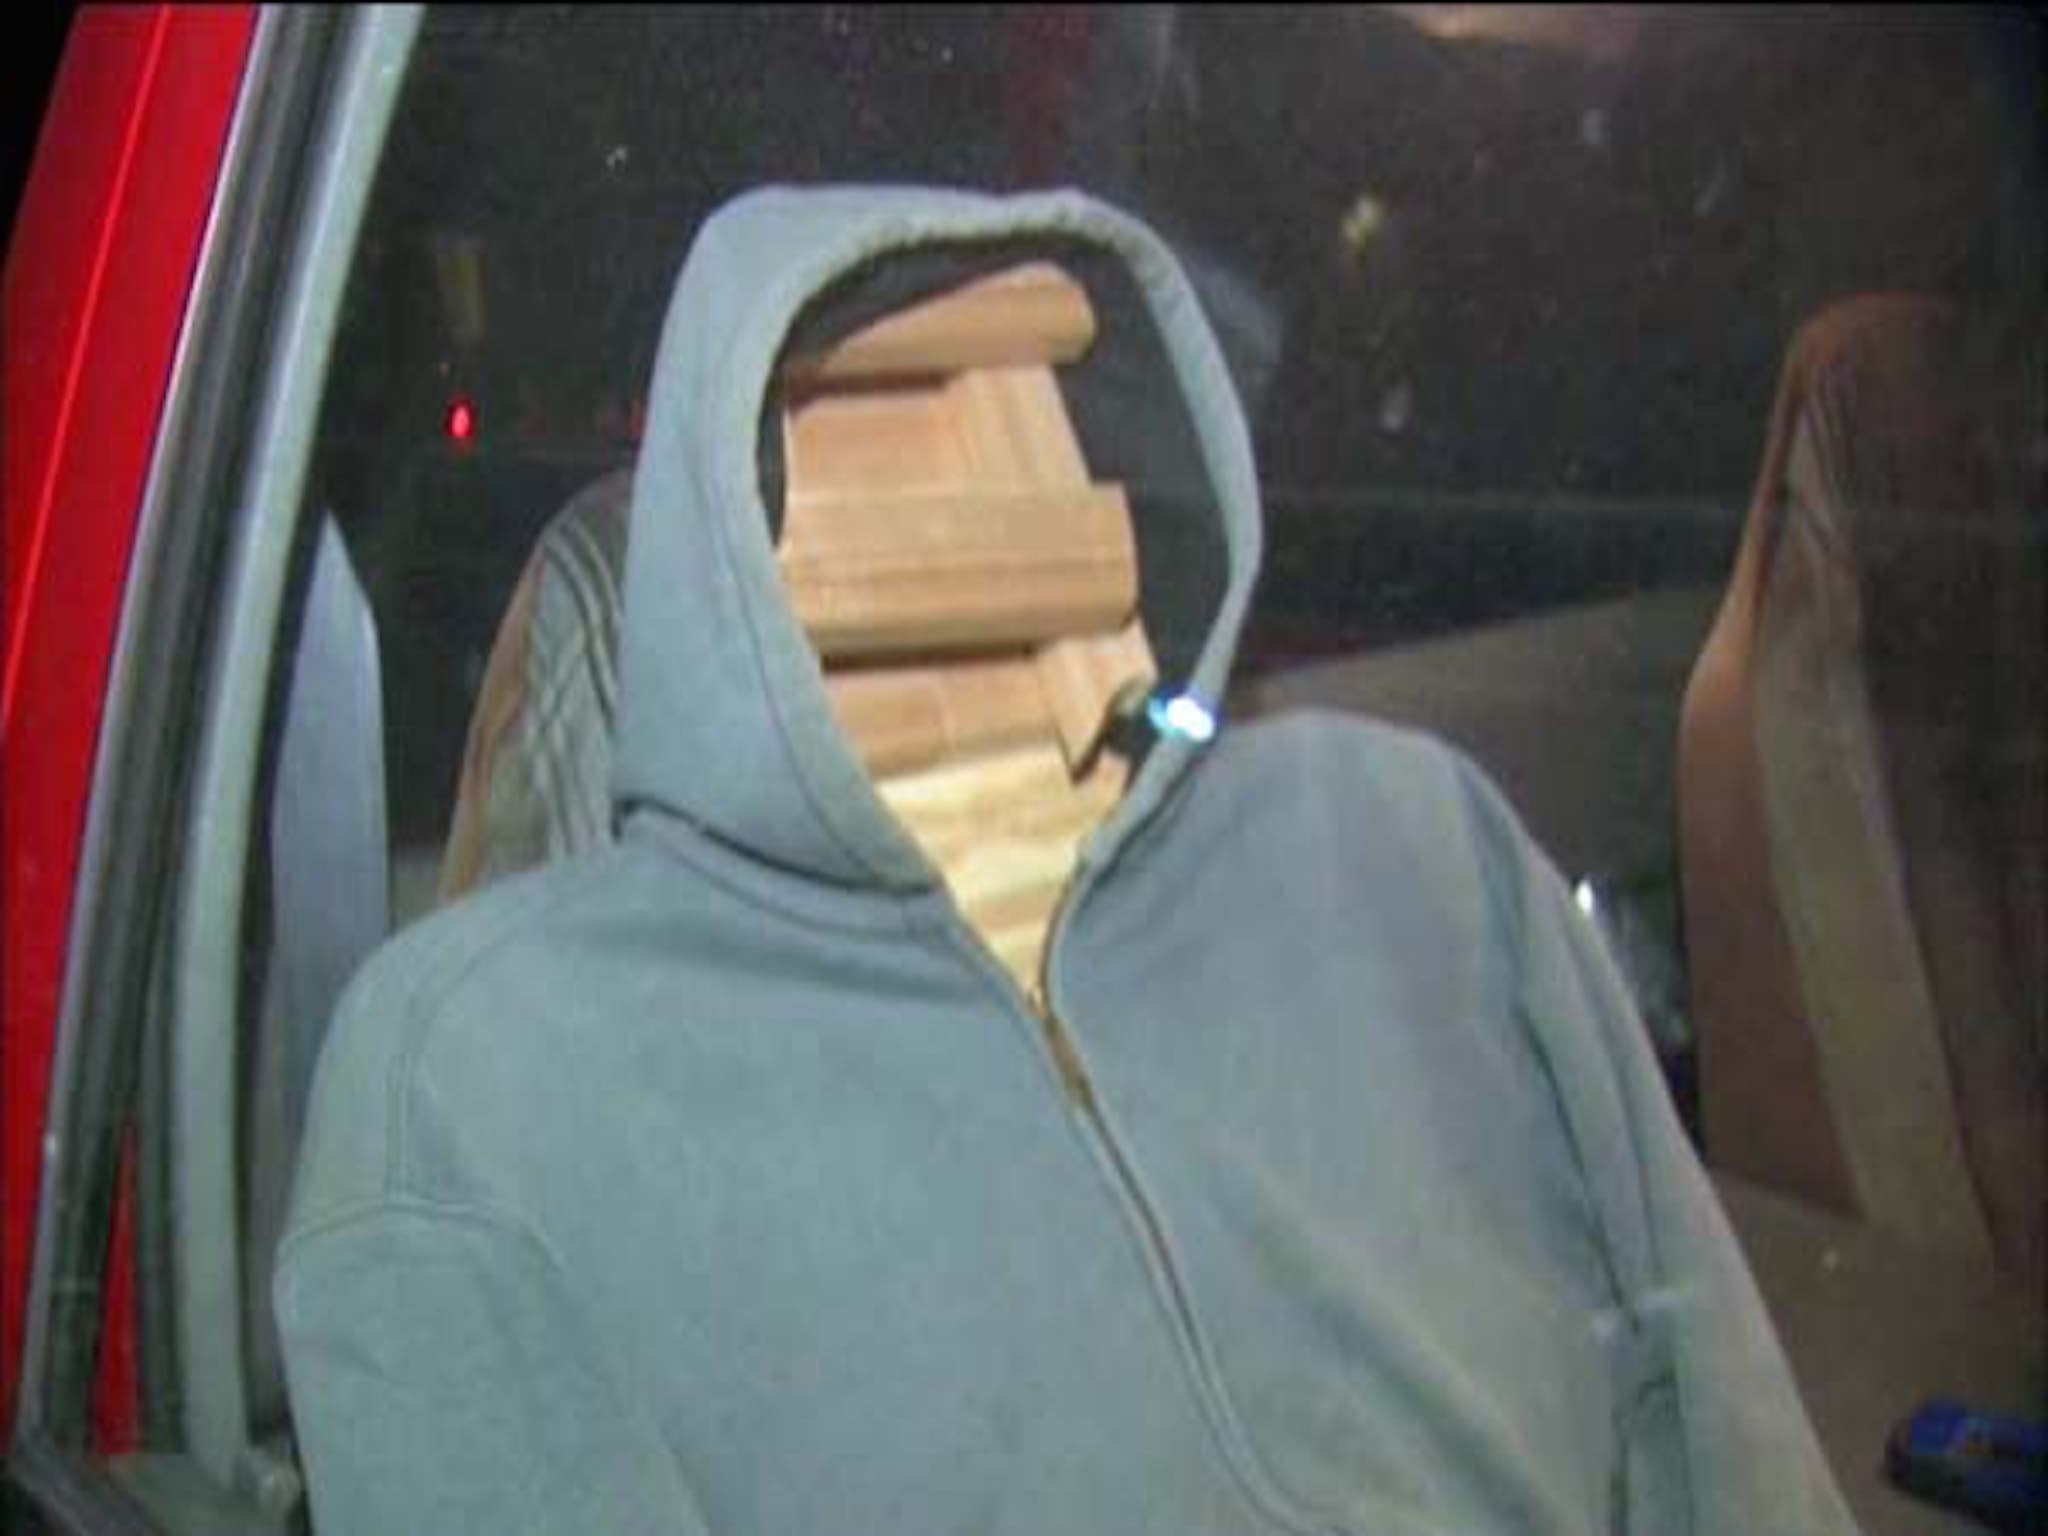 A man was stopped in a HOV lane with this wooden dummy